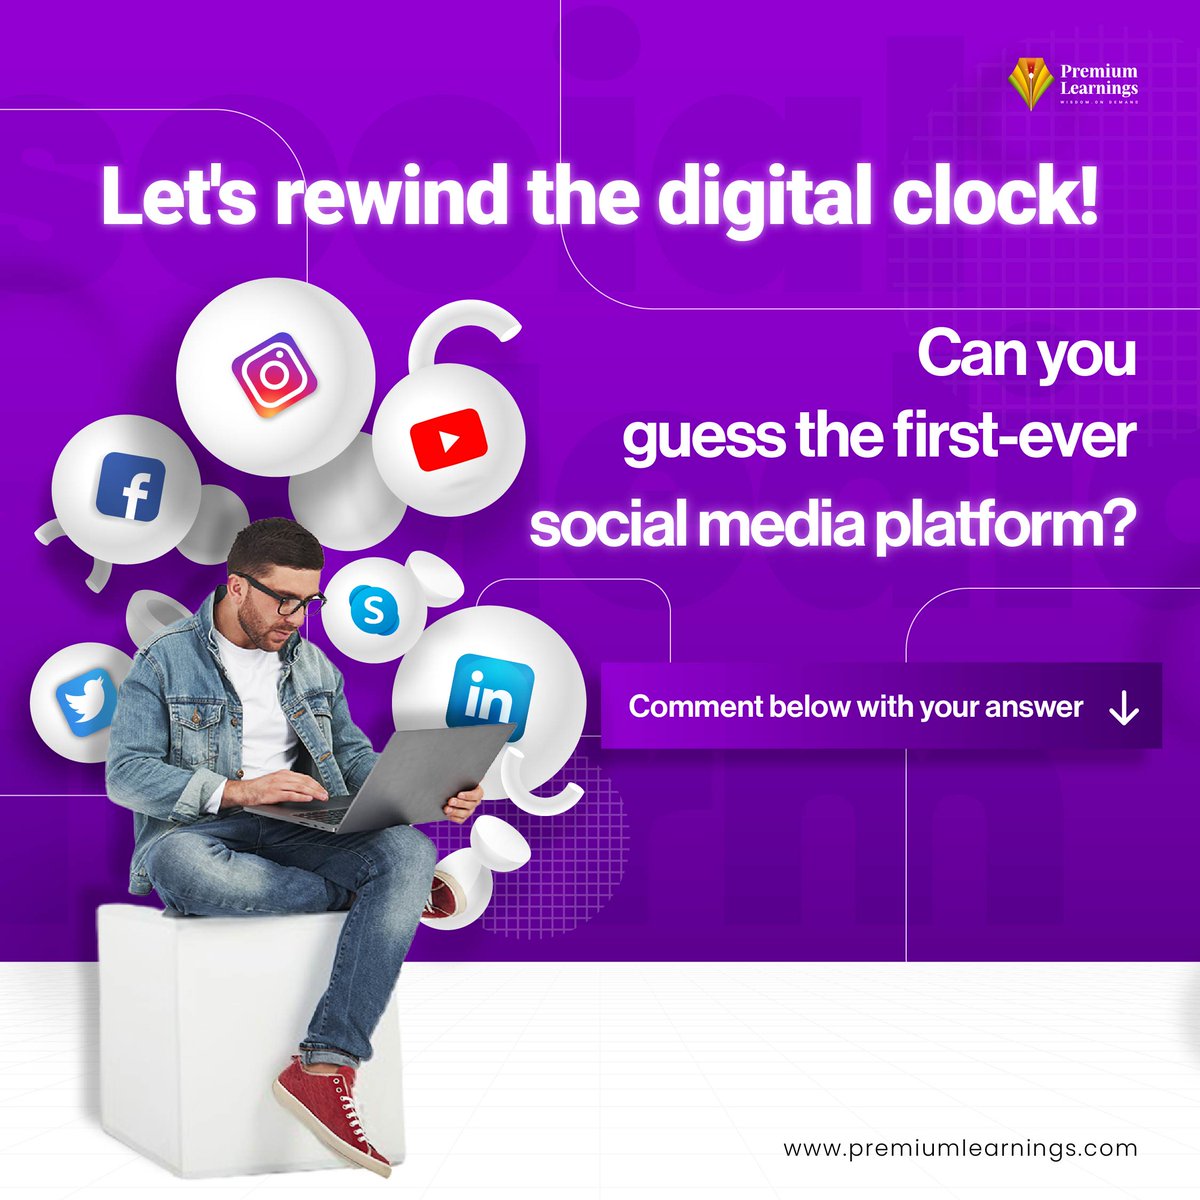 Time for a Digital Throwback! ⏪ Can you guess the pioneer of social media platforms? Drop your answer in the comments

#DigitalRewind #SocialMediaHistory #TechTrivia #ThrowbackThursday #GuessThePlatform #DigitalNostalgia